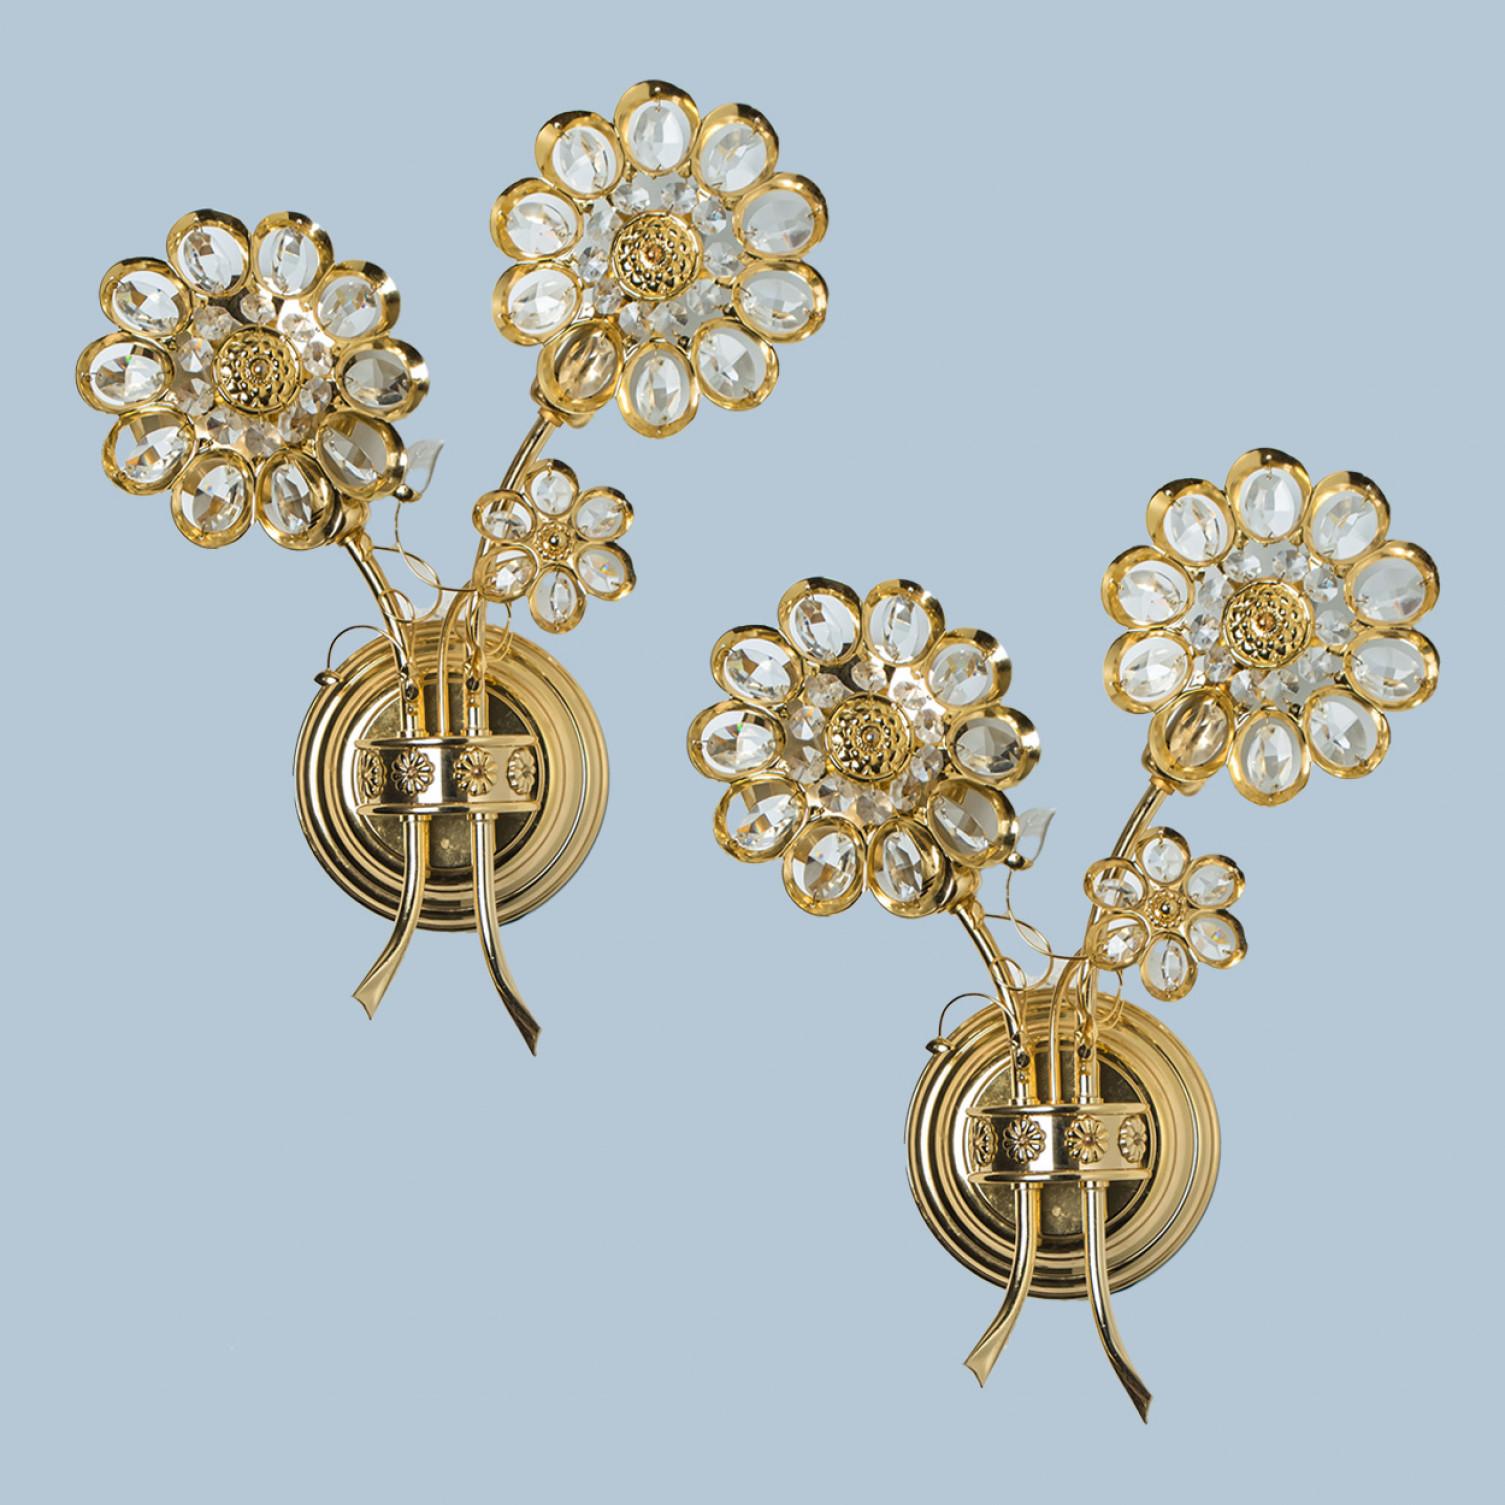 A stunning set of gilt and crystal wall-mounted sconce by Palwa, Germany. Manufactured around 1965-1975.
This luxurious wall light features beautifully cut crystals in the form of three flowers and petals set on a gold-plated brass